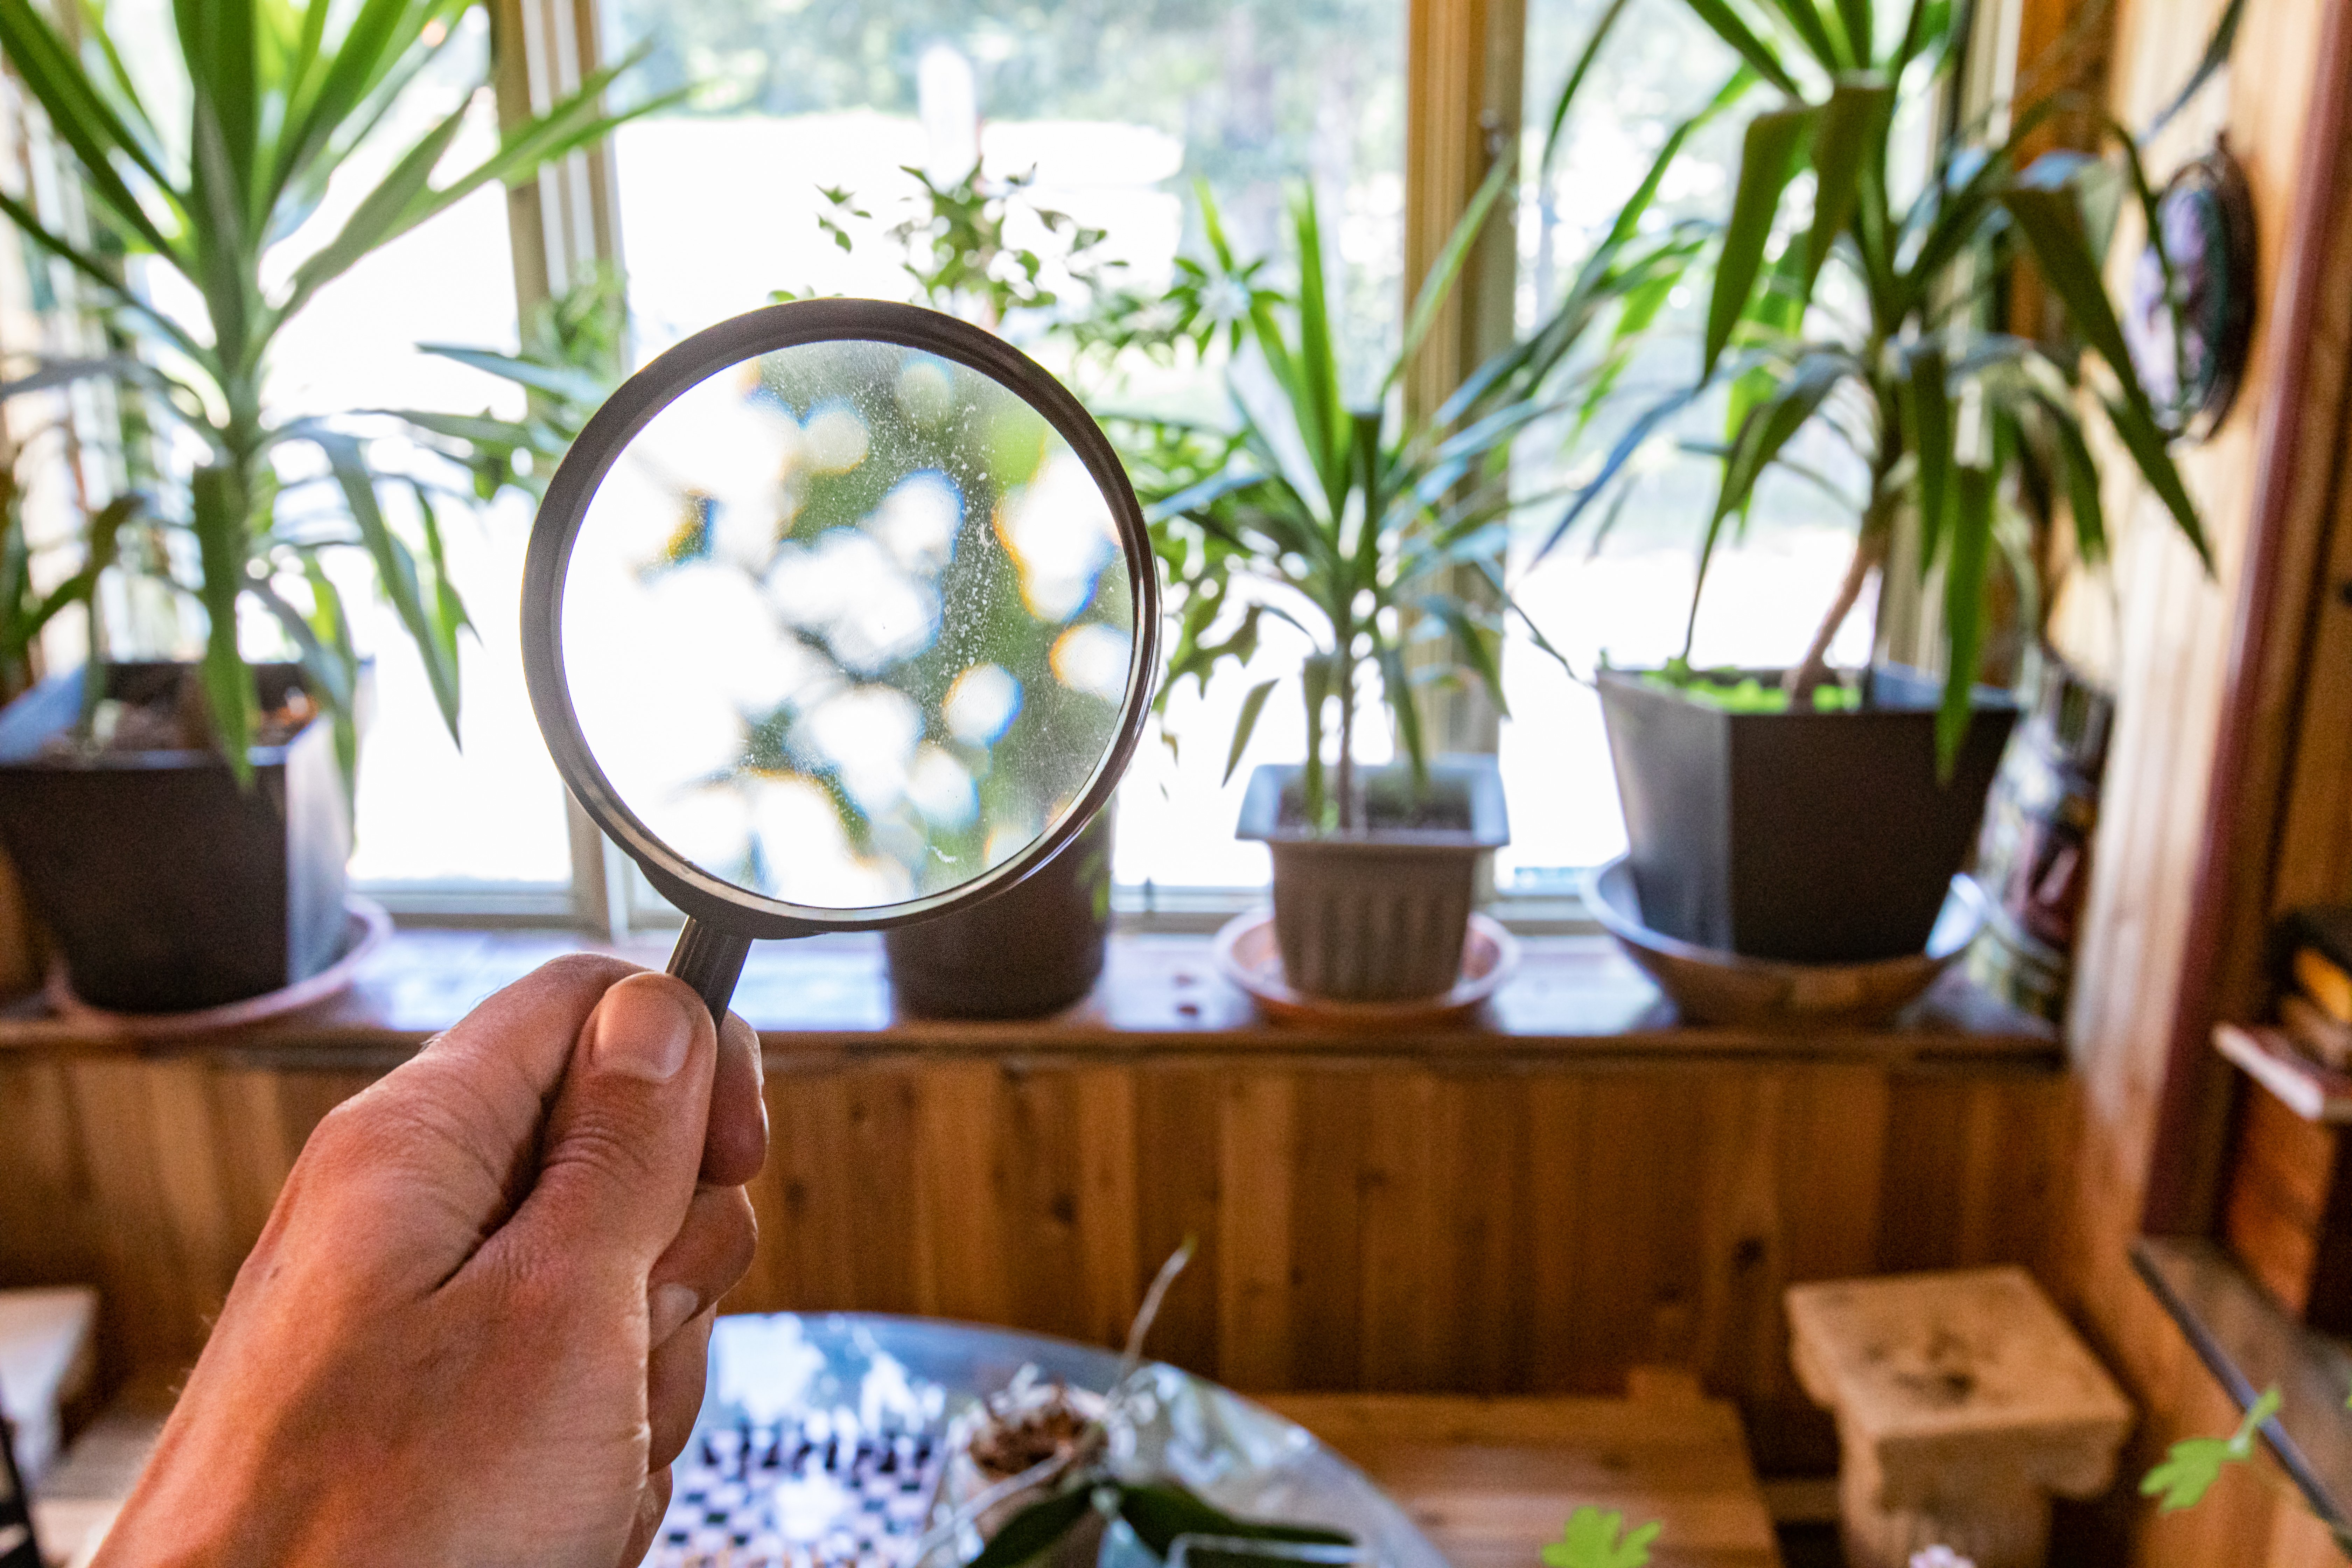 Houseplants are seen through a magnification lens during a home inspection, potted green plants on a window ledge in a family room, with blurred background.